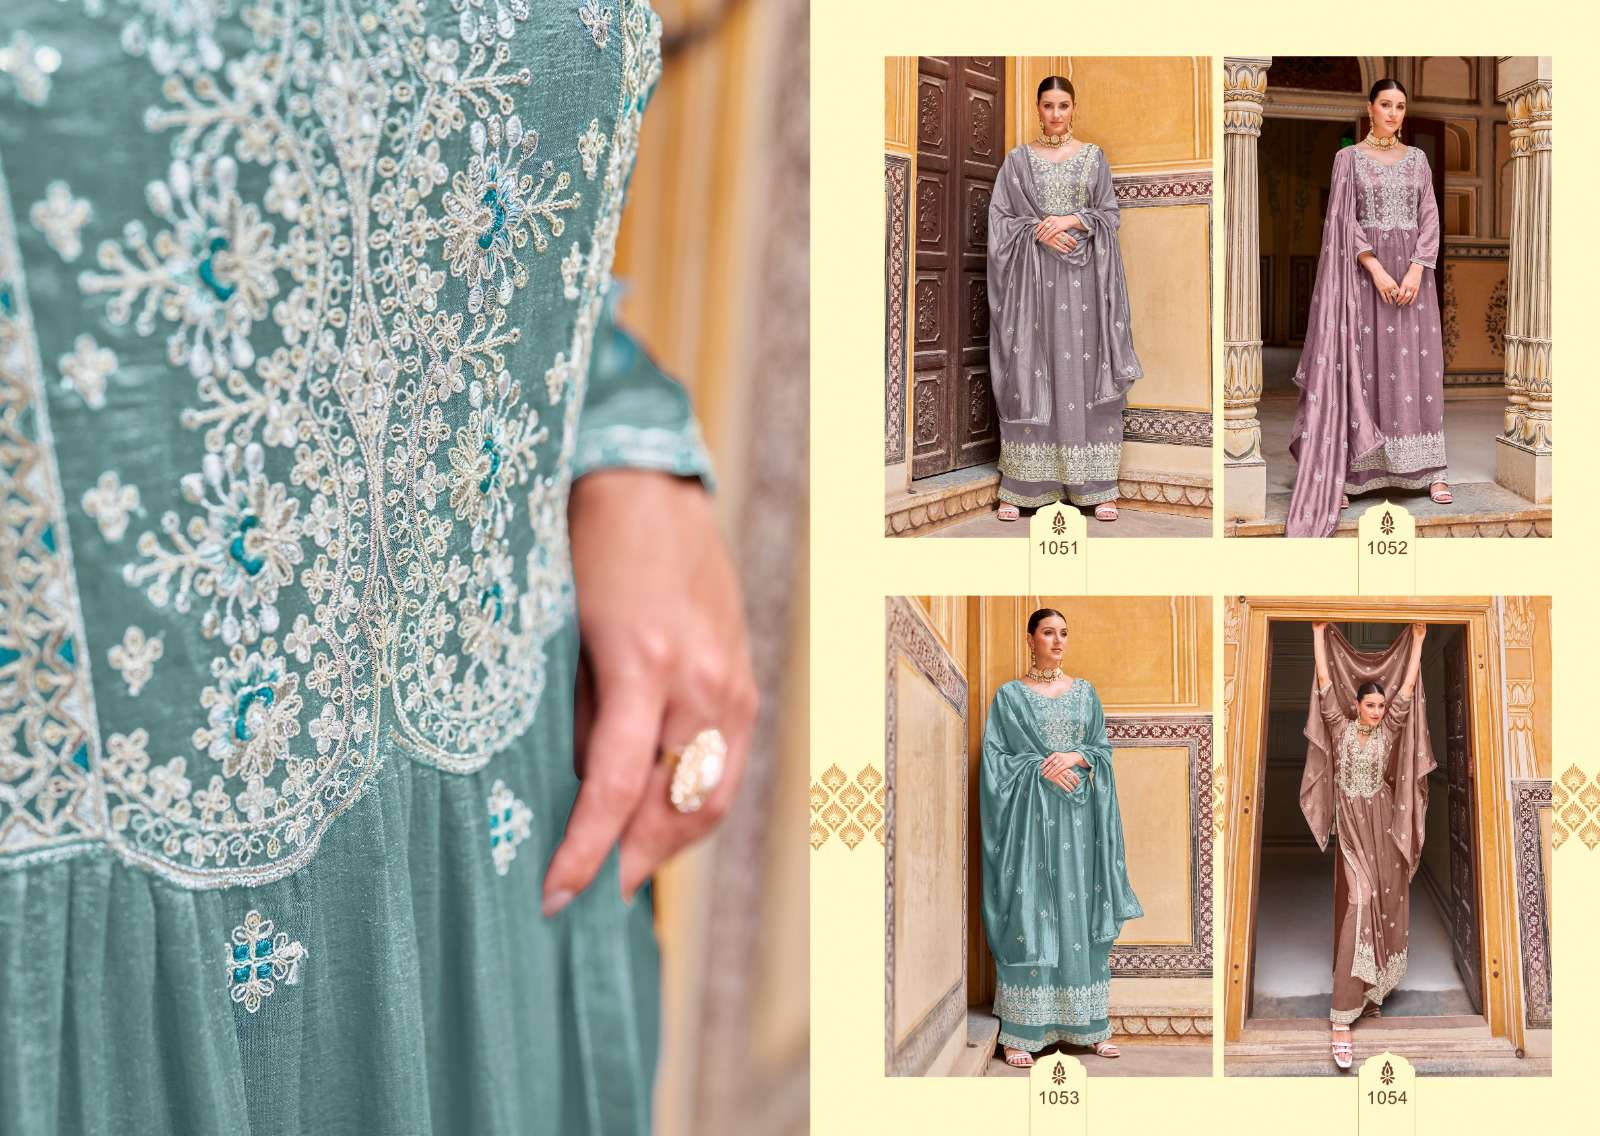 Unni By Aroma 1051 To 1054 Series Beautiful Festive Suits Stylish Fancy Colorful Party Wear & Occasional Wear Premium Silk With Embroidery Dresses At Wholesale Price